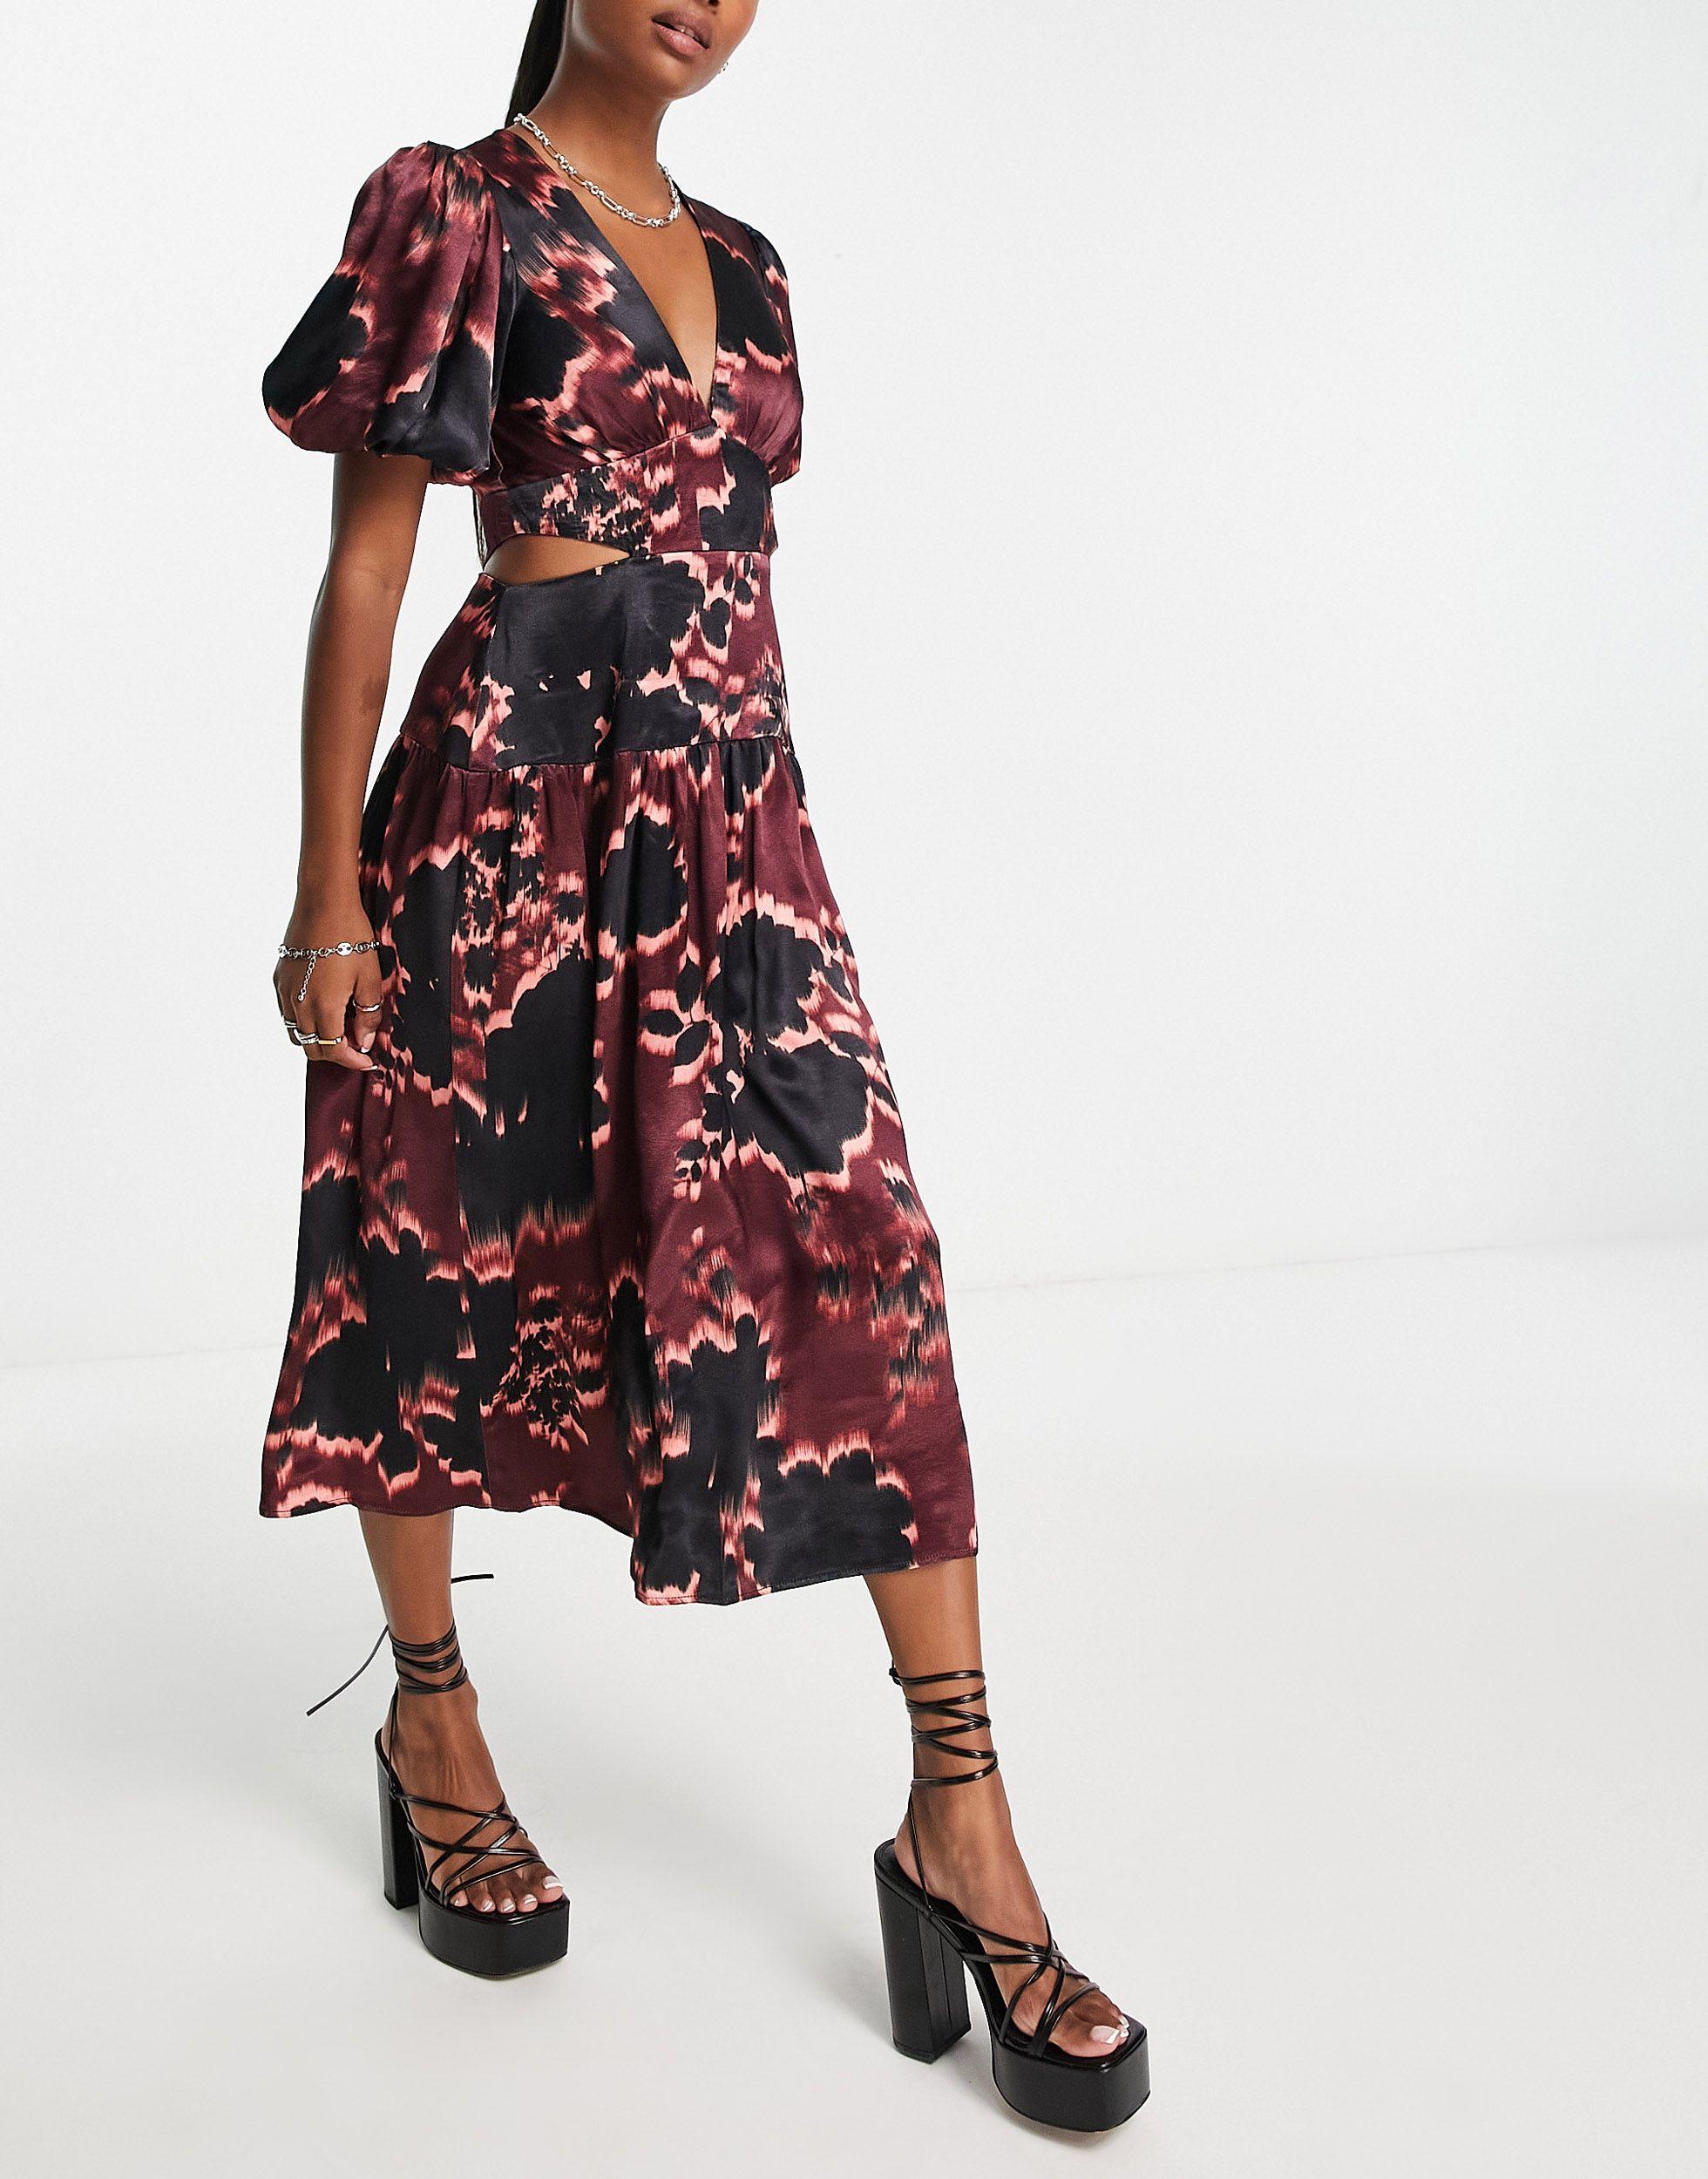 Topshop Unique Graphic Floral Cut Out Waist Midi Dress in Red | Lyst Canada